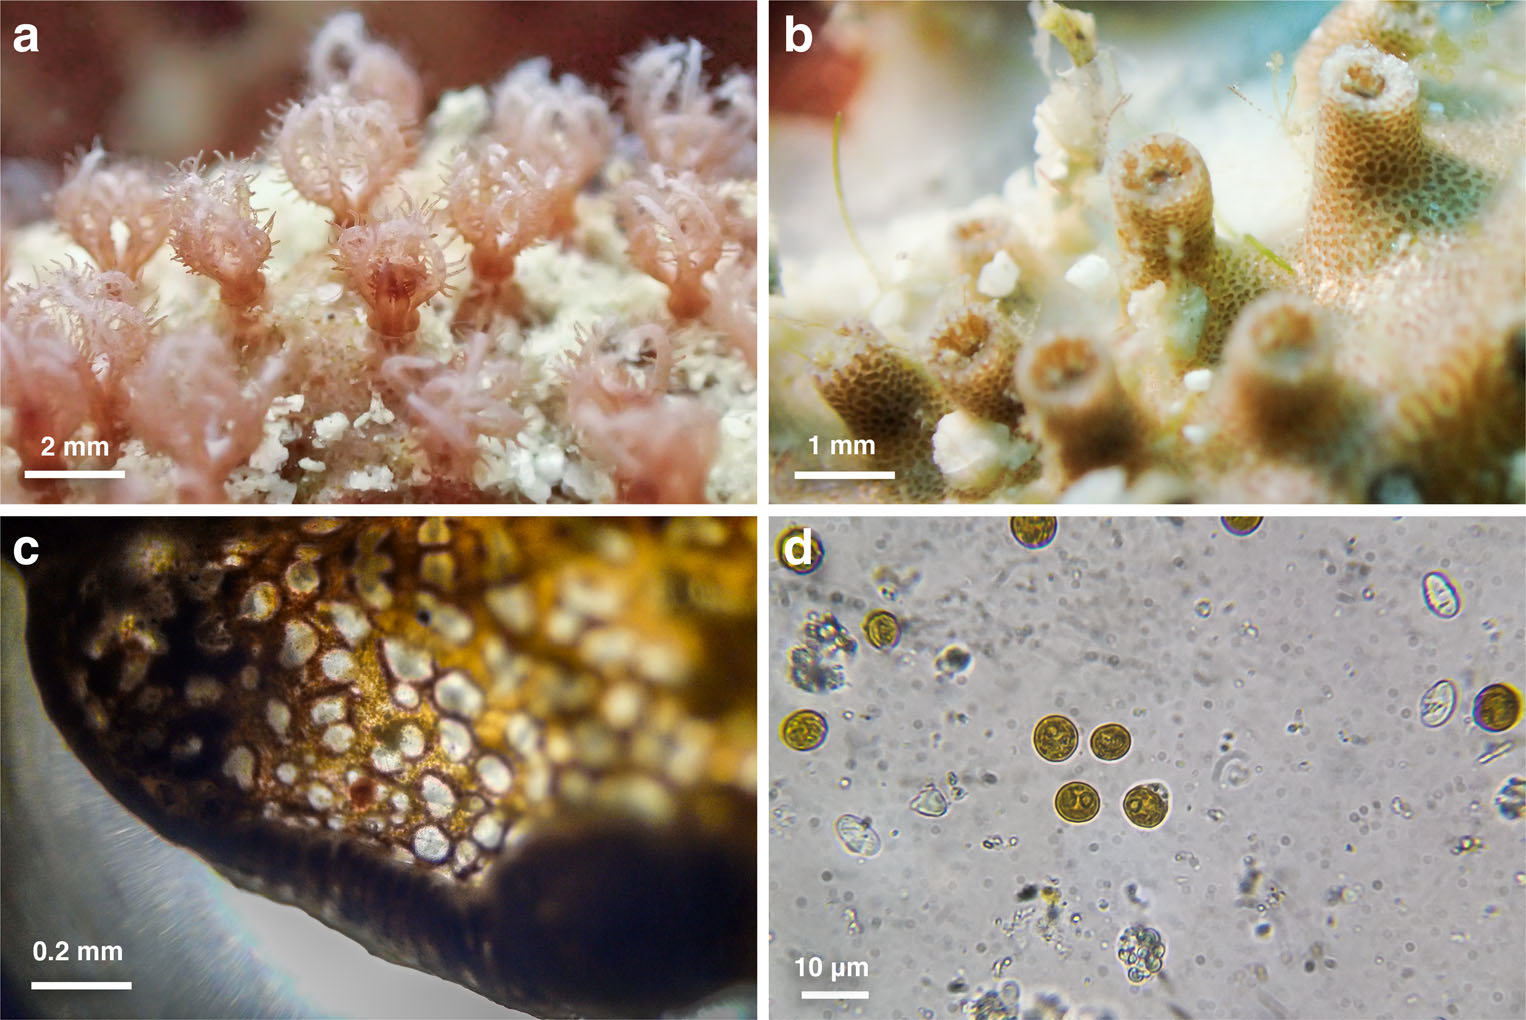  Fig. 2 Colonies of Nanipora coral. a Close-up lateral view of polyps with view of pinnules. View of skeleton and calyces with polyps retracted. c Edge of laminar growth as viewed through a low magnification microscope showing pores and granular pigmentation. d Magnified view of extracted Symbiodinium (Urgell et al. 2017)